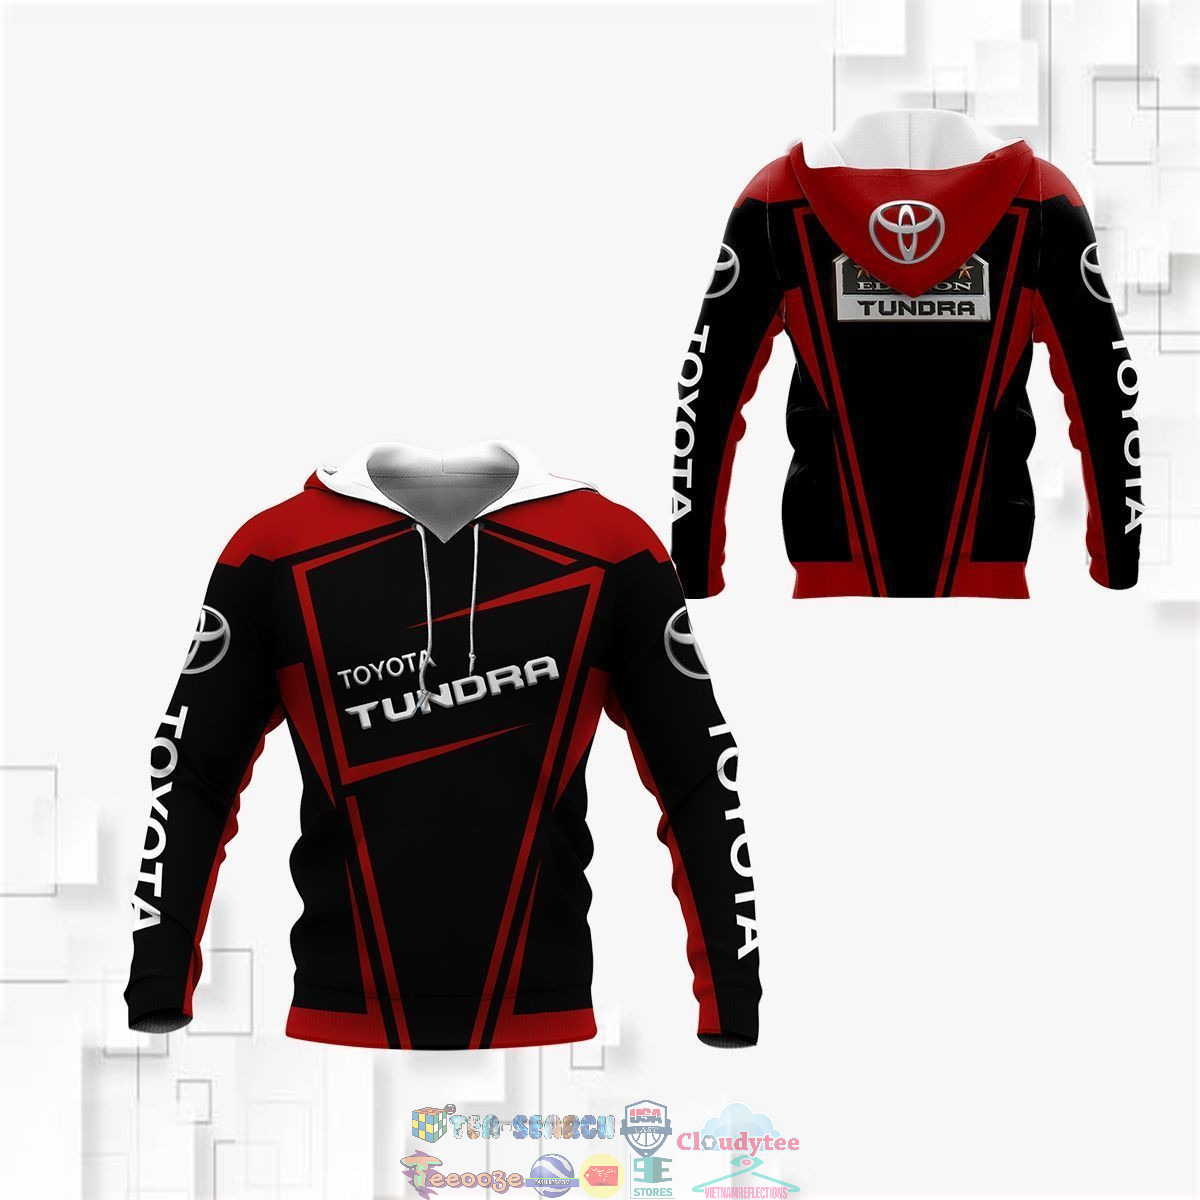 Toyota Tundra ver 4 3D hoodie and t-shirt